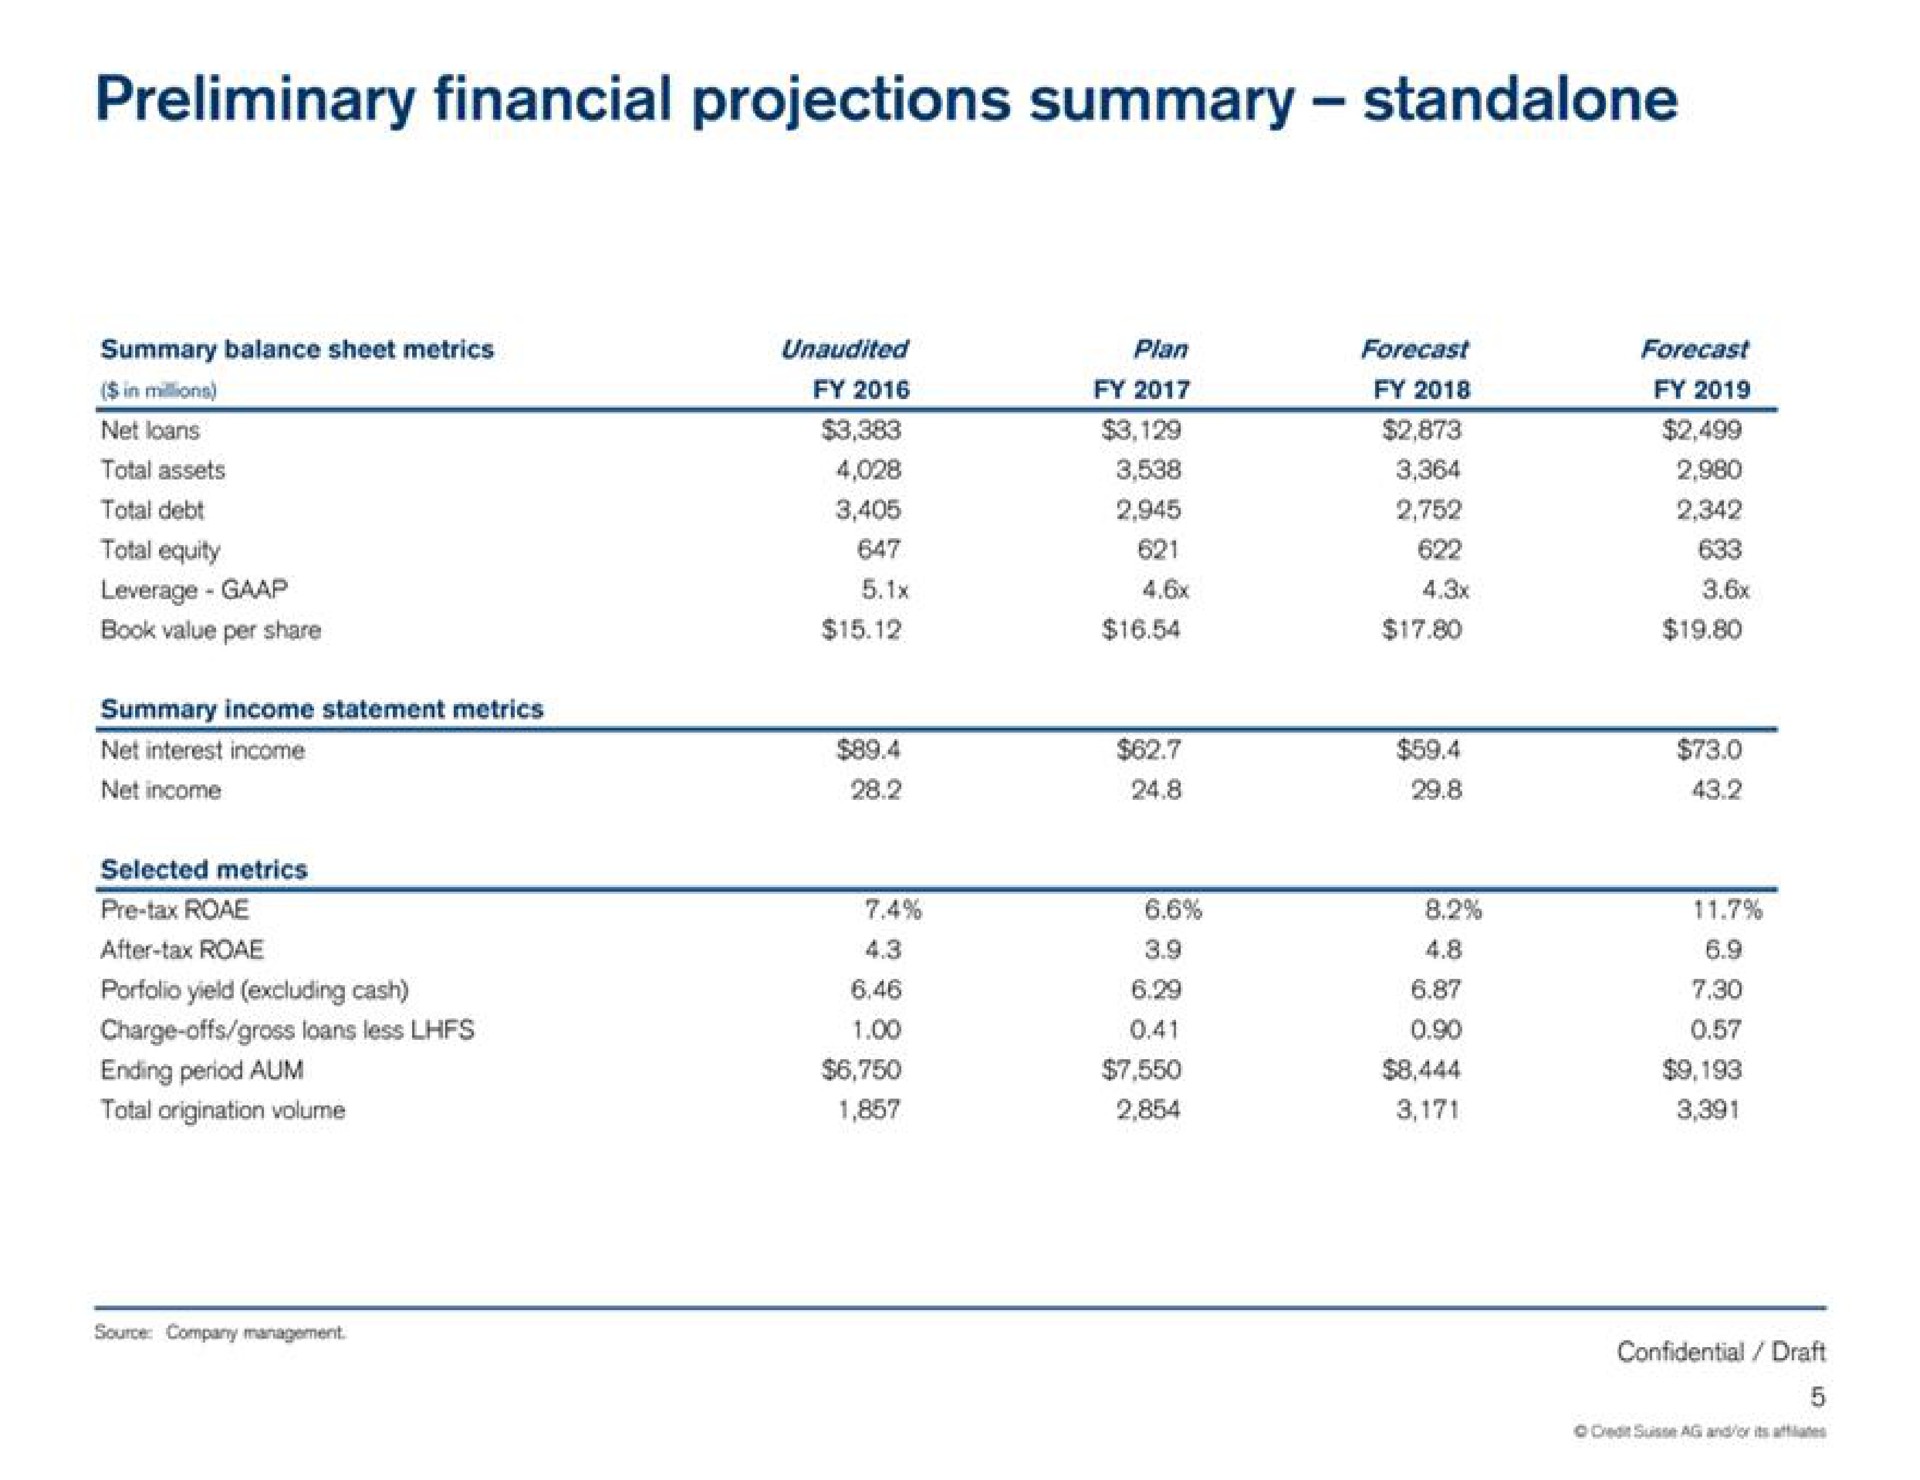 preliminary financial projections summary tax ending period aum tay | Credit Suisse